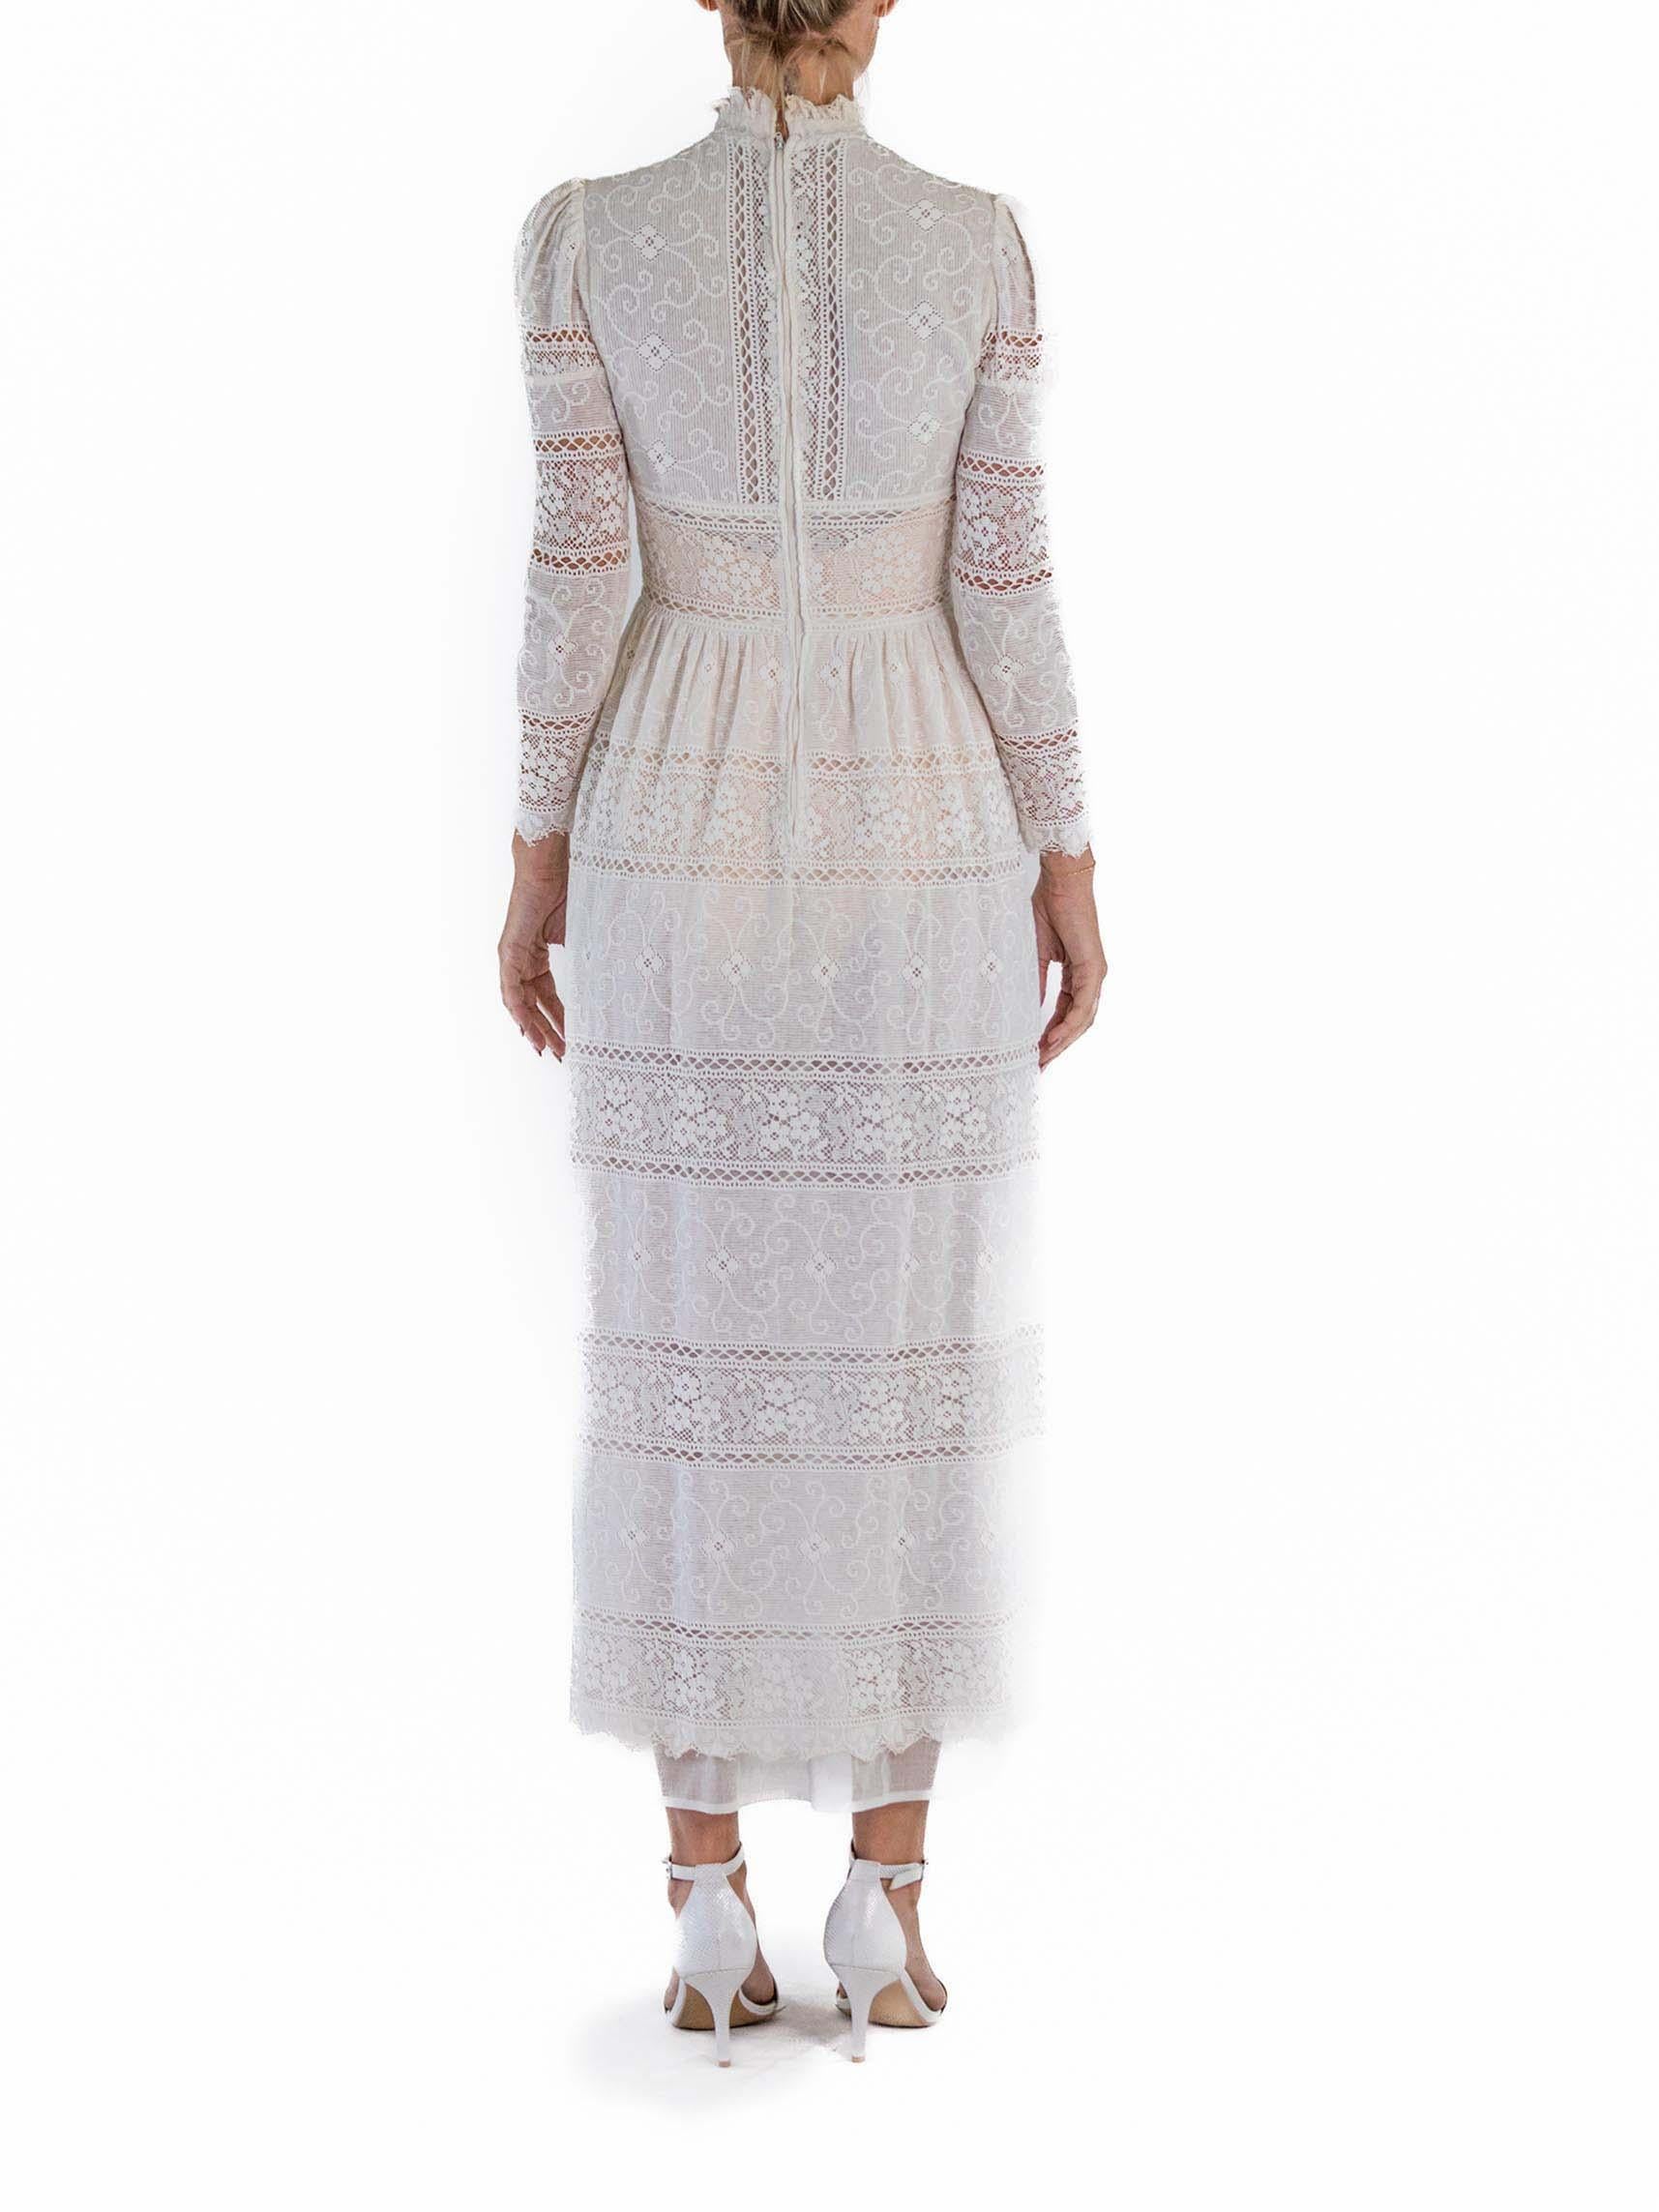 1970S White Victorian Revival Lace Long Sleeved Dress For Sale 4